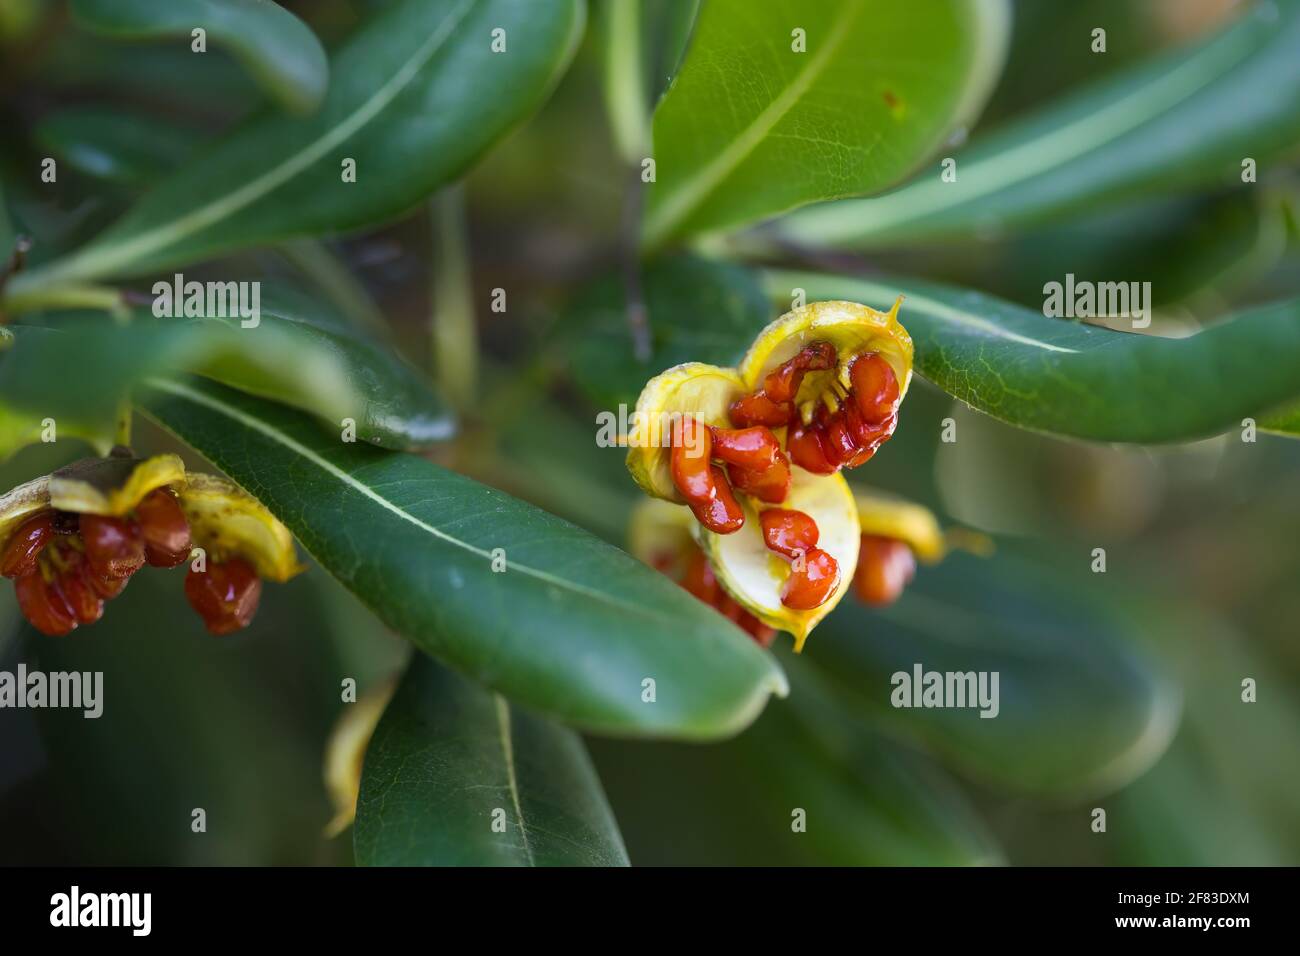 Seeds and leaves of Euonymus japonicus (a species of flowering plant in the family Celastraceae) Stock Photo